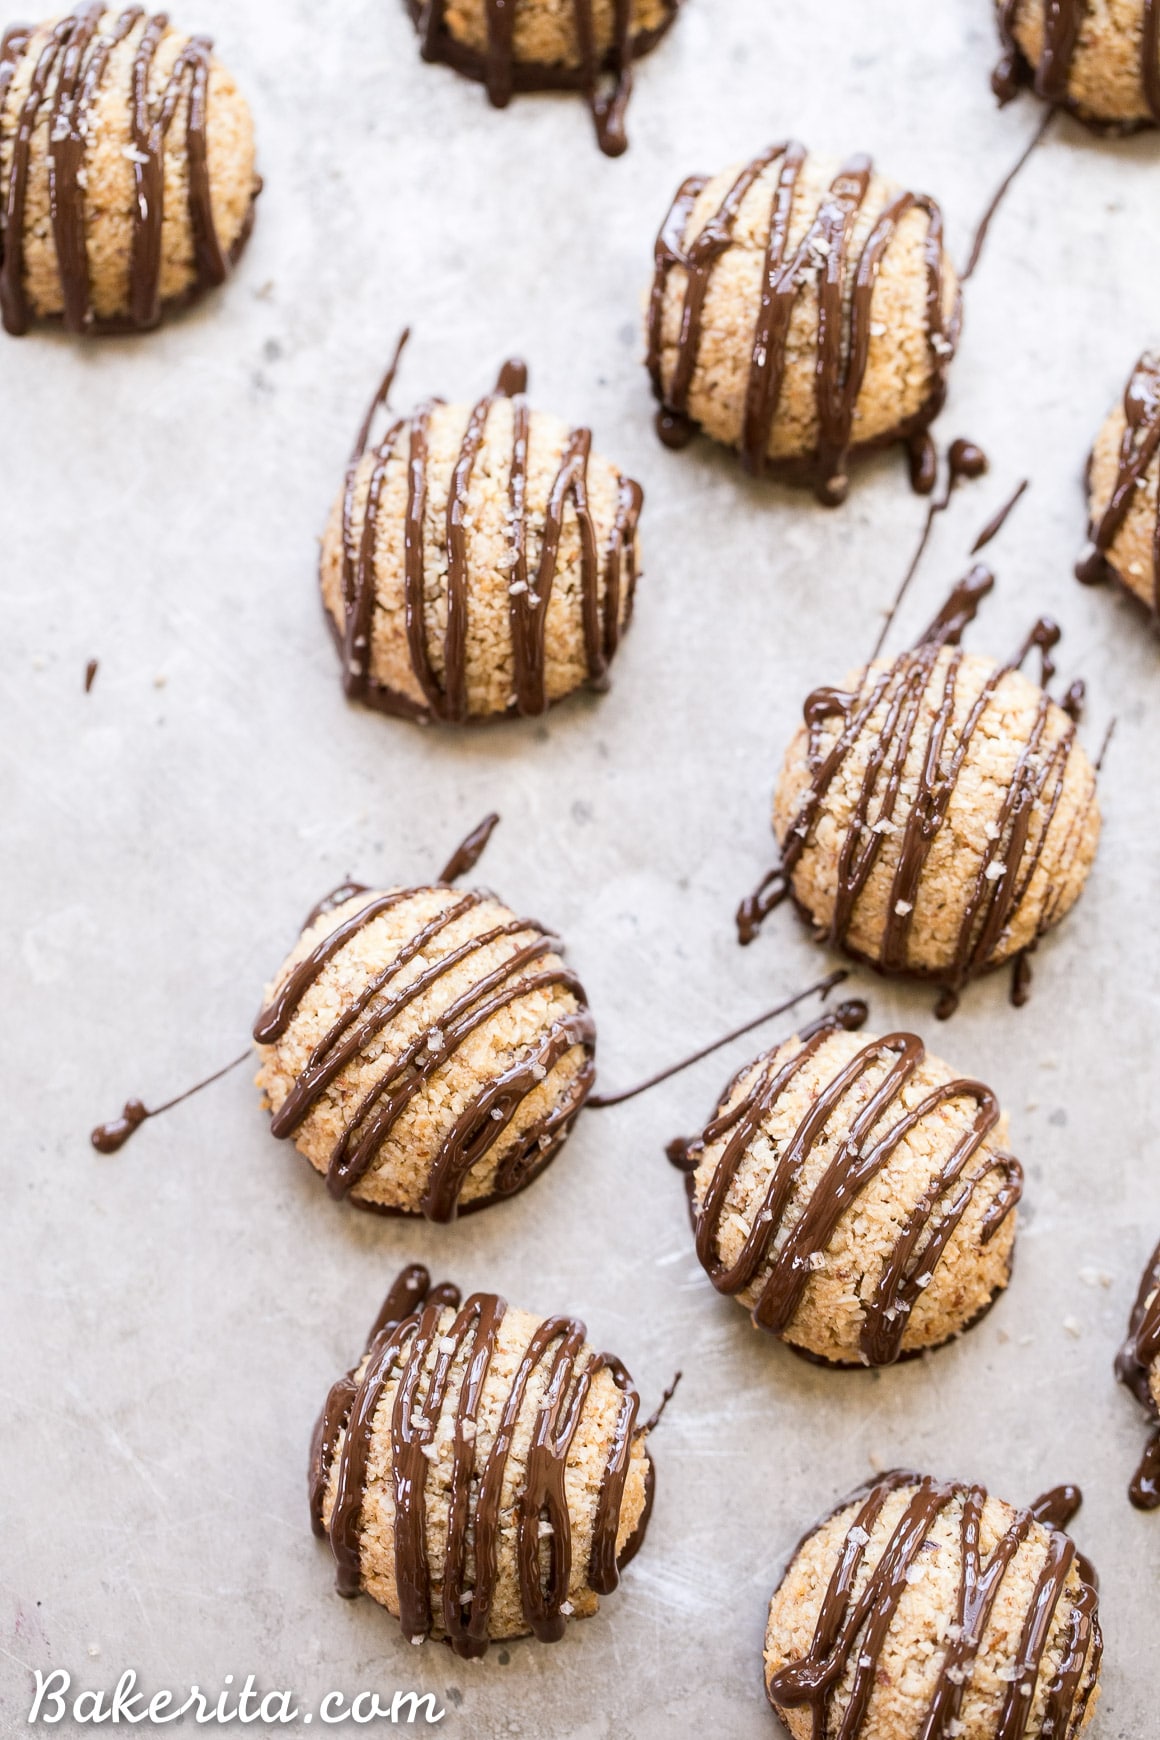 These Chocolate-Dipped Vanilla Bean Macaroons are a quick and easy dessert that is gluten-free, Paleo + vegan! These macaroons are baked low and slow and have a chocolate drizzle.